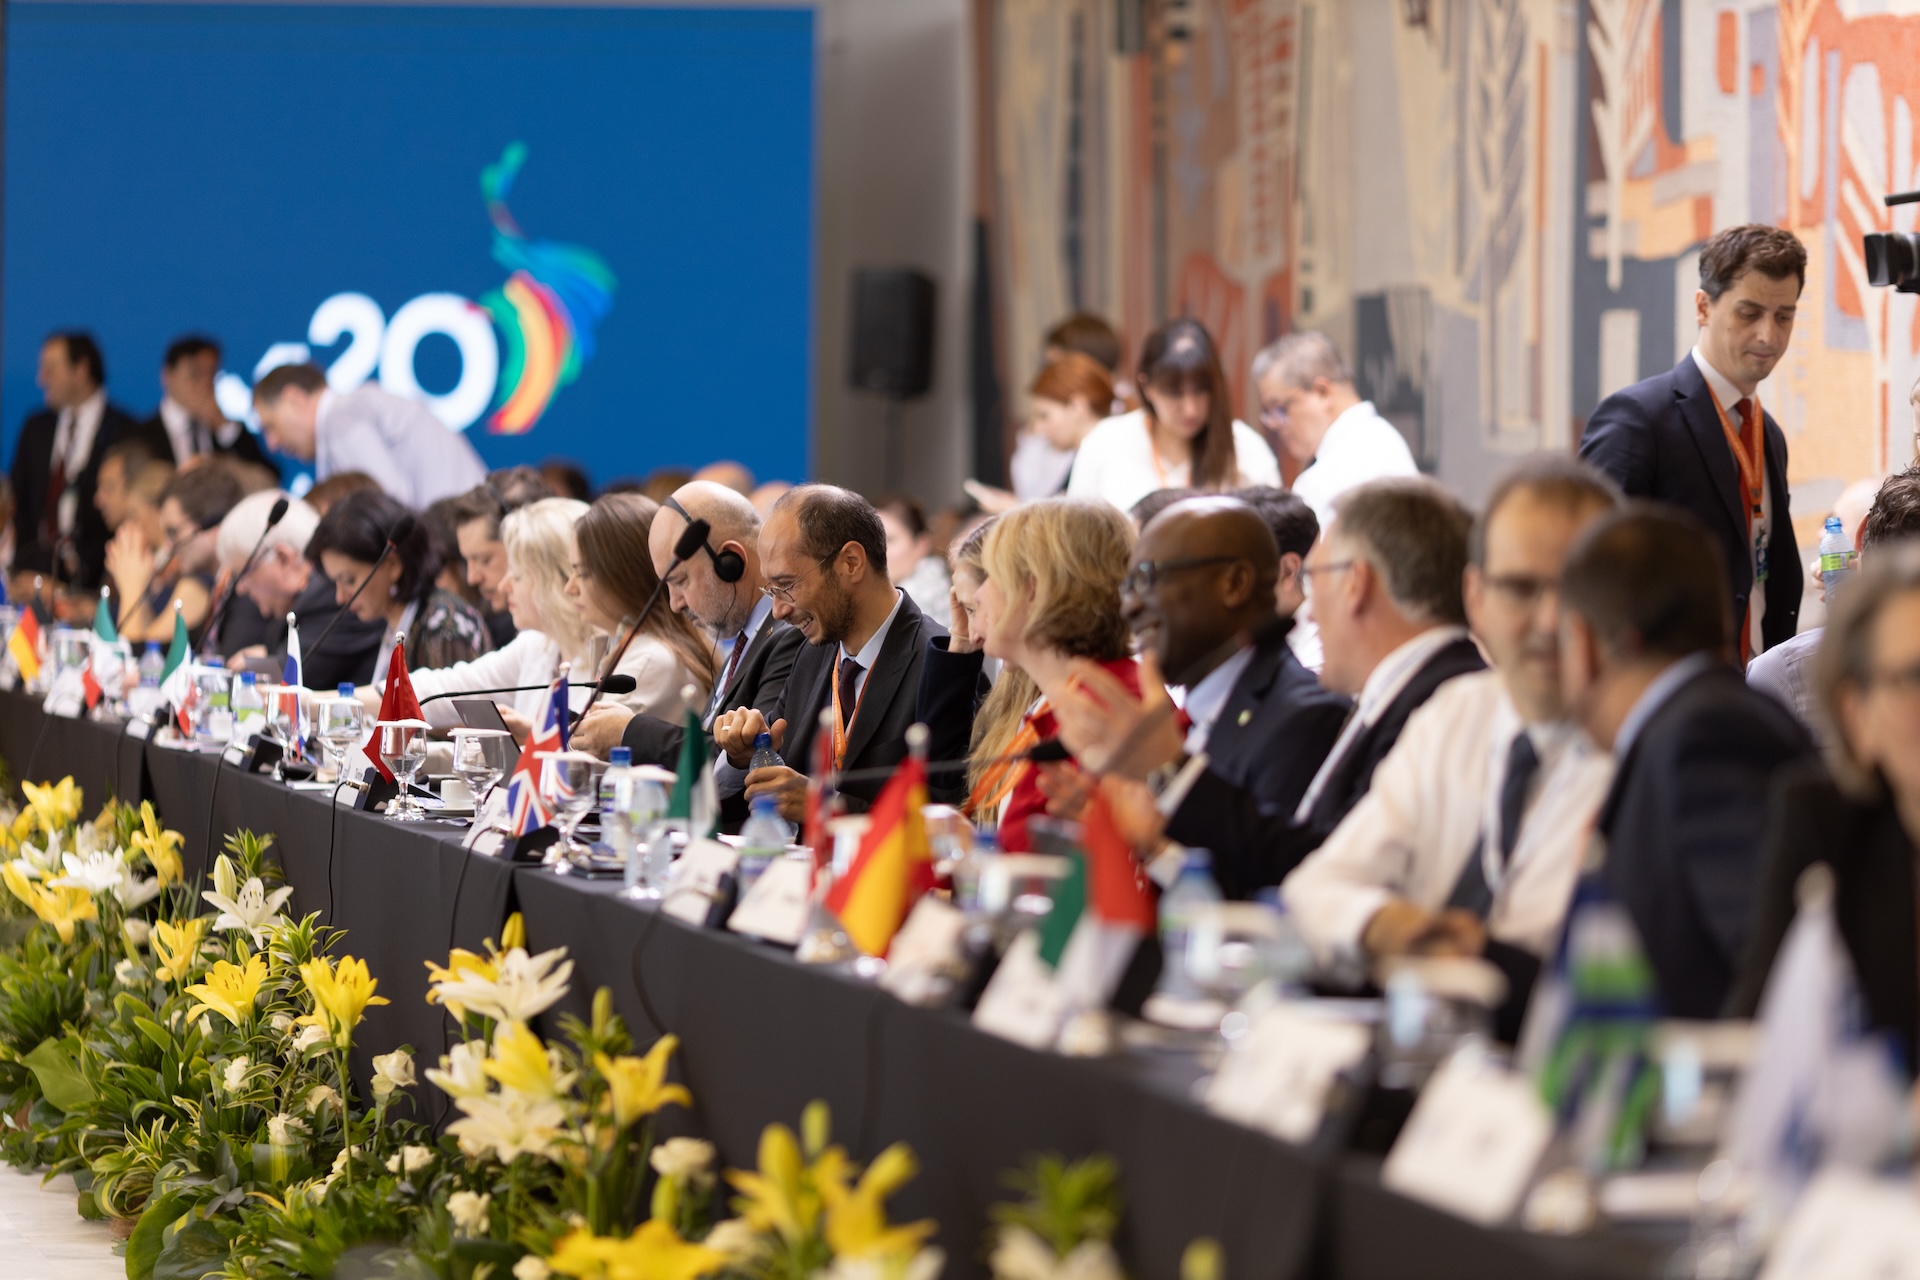 Authorities from the world's largest economies at the joint meeting of the Sherpas and Finance Tracks at the G20 Brasil. Photo: Audiovisual/G20 Brasil